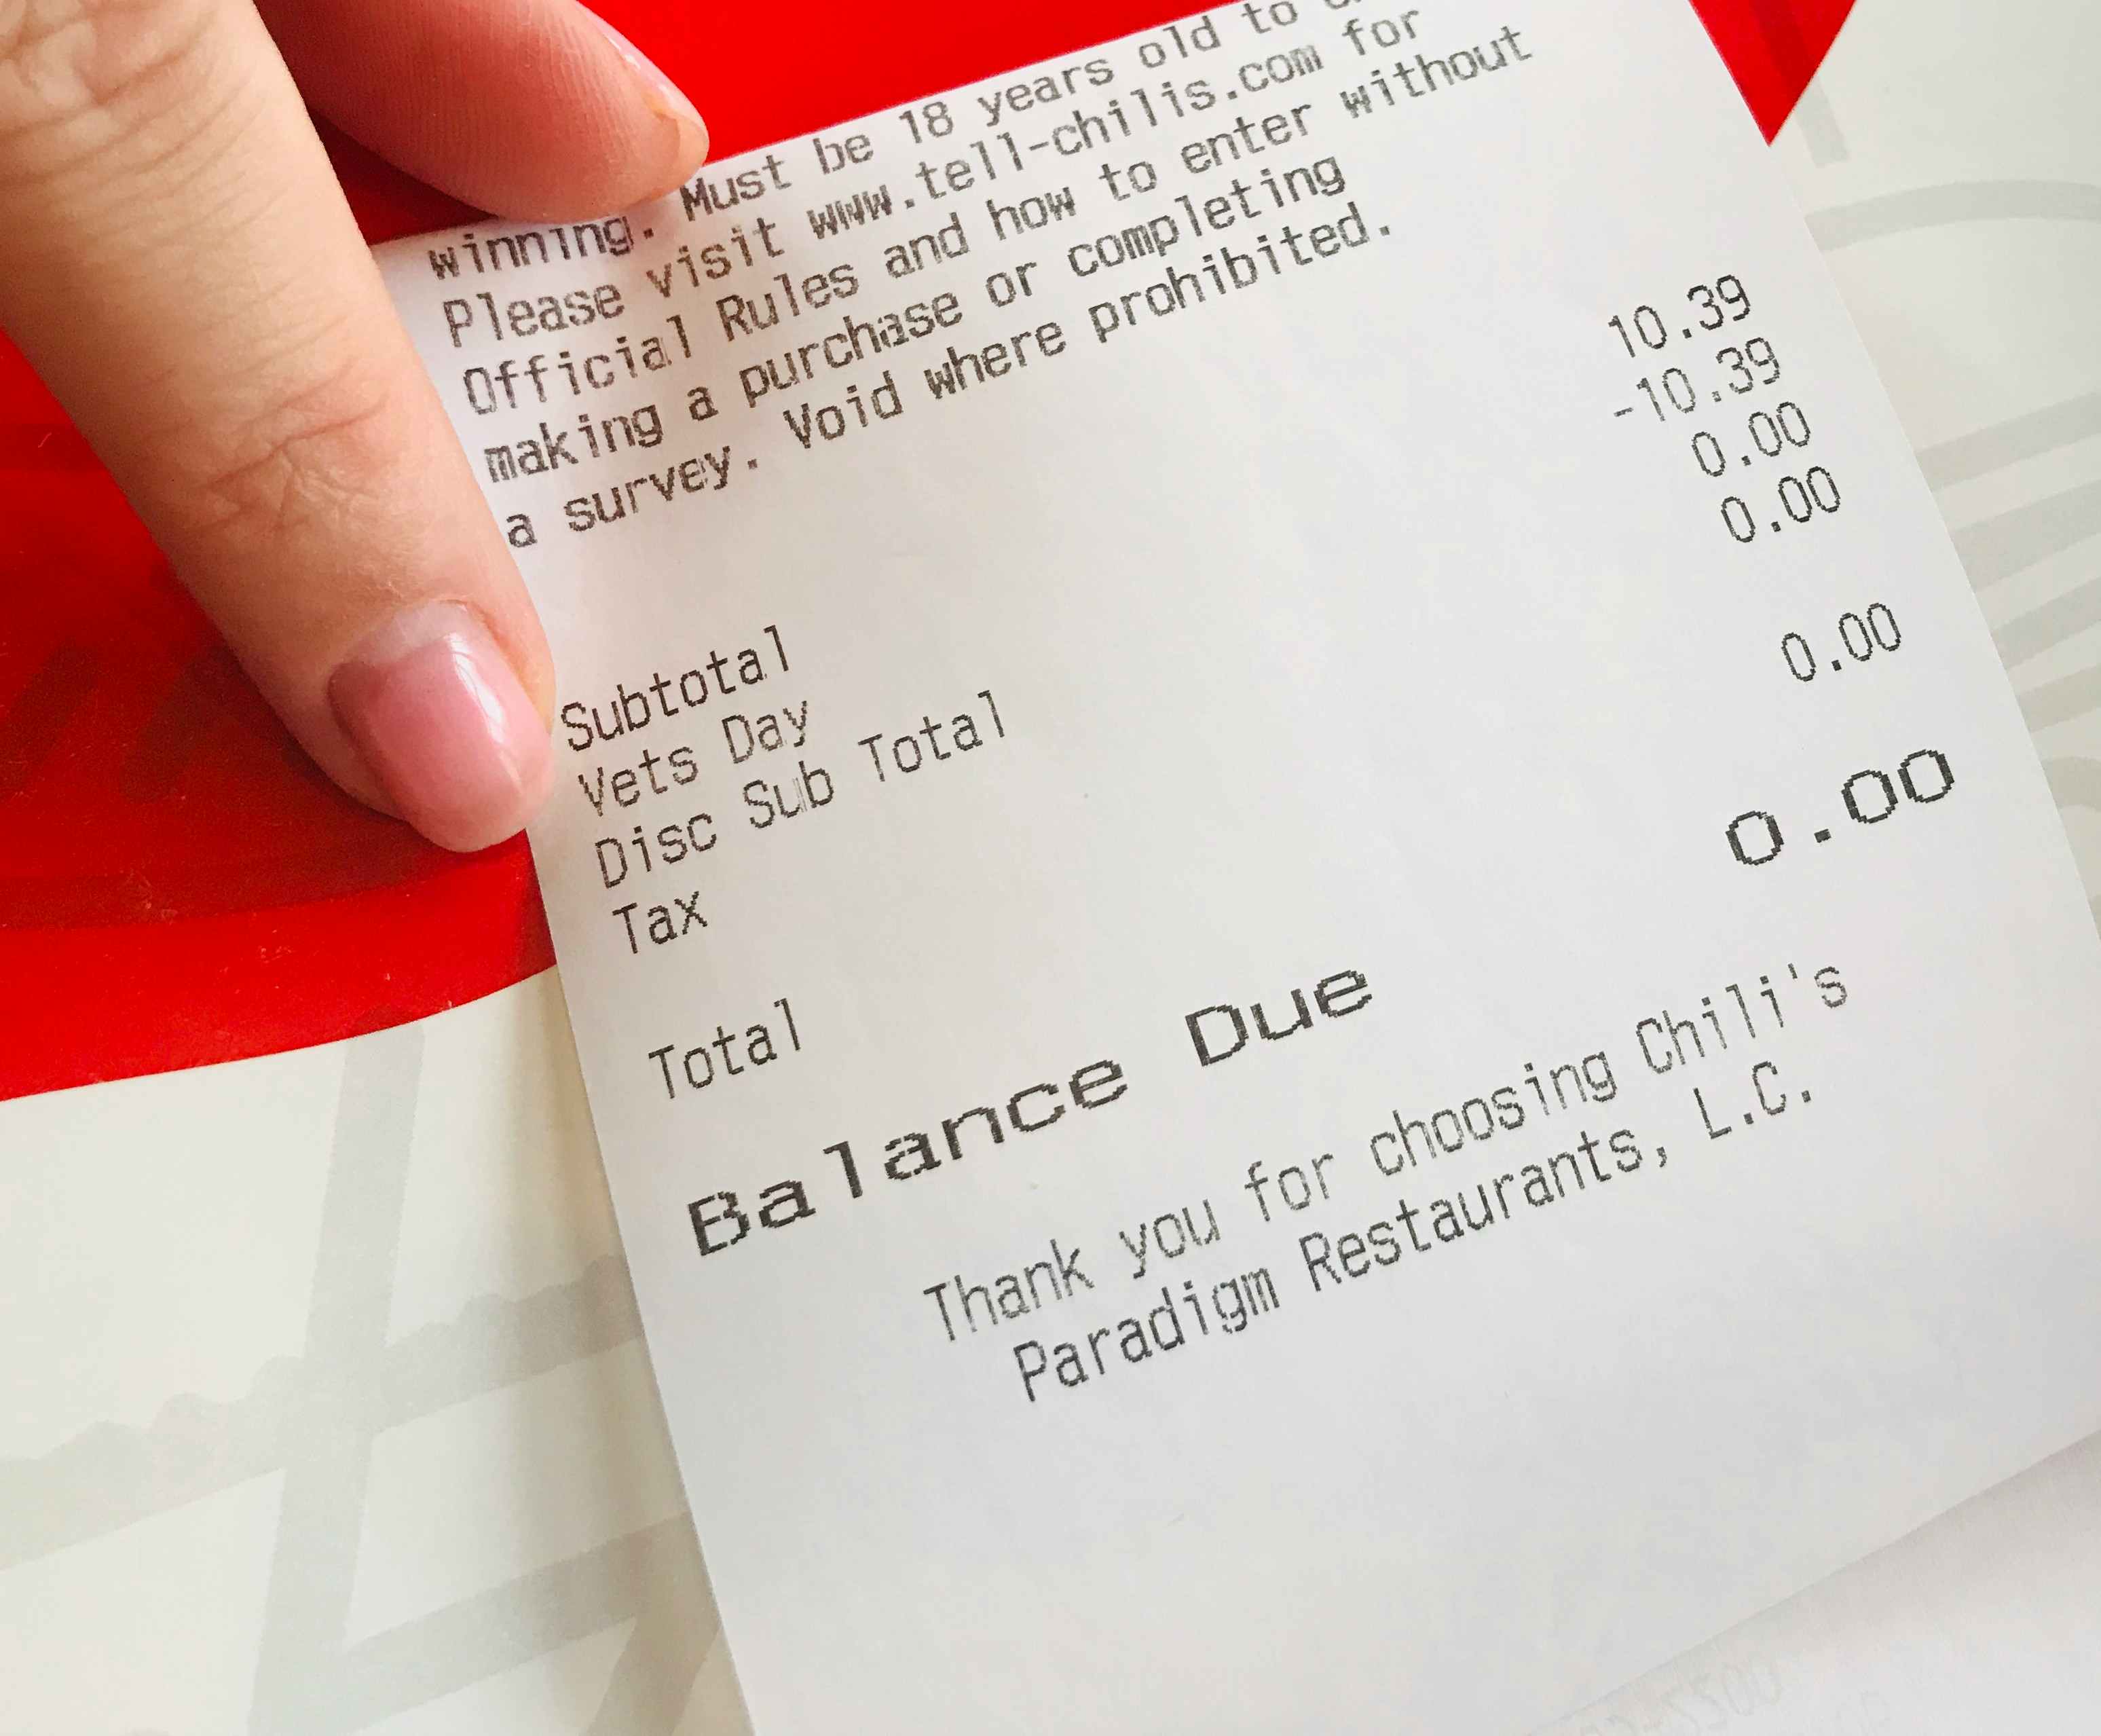 A receipt with $0.00 due because of a Veteran's Day discount applied to the total.